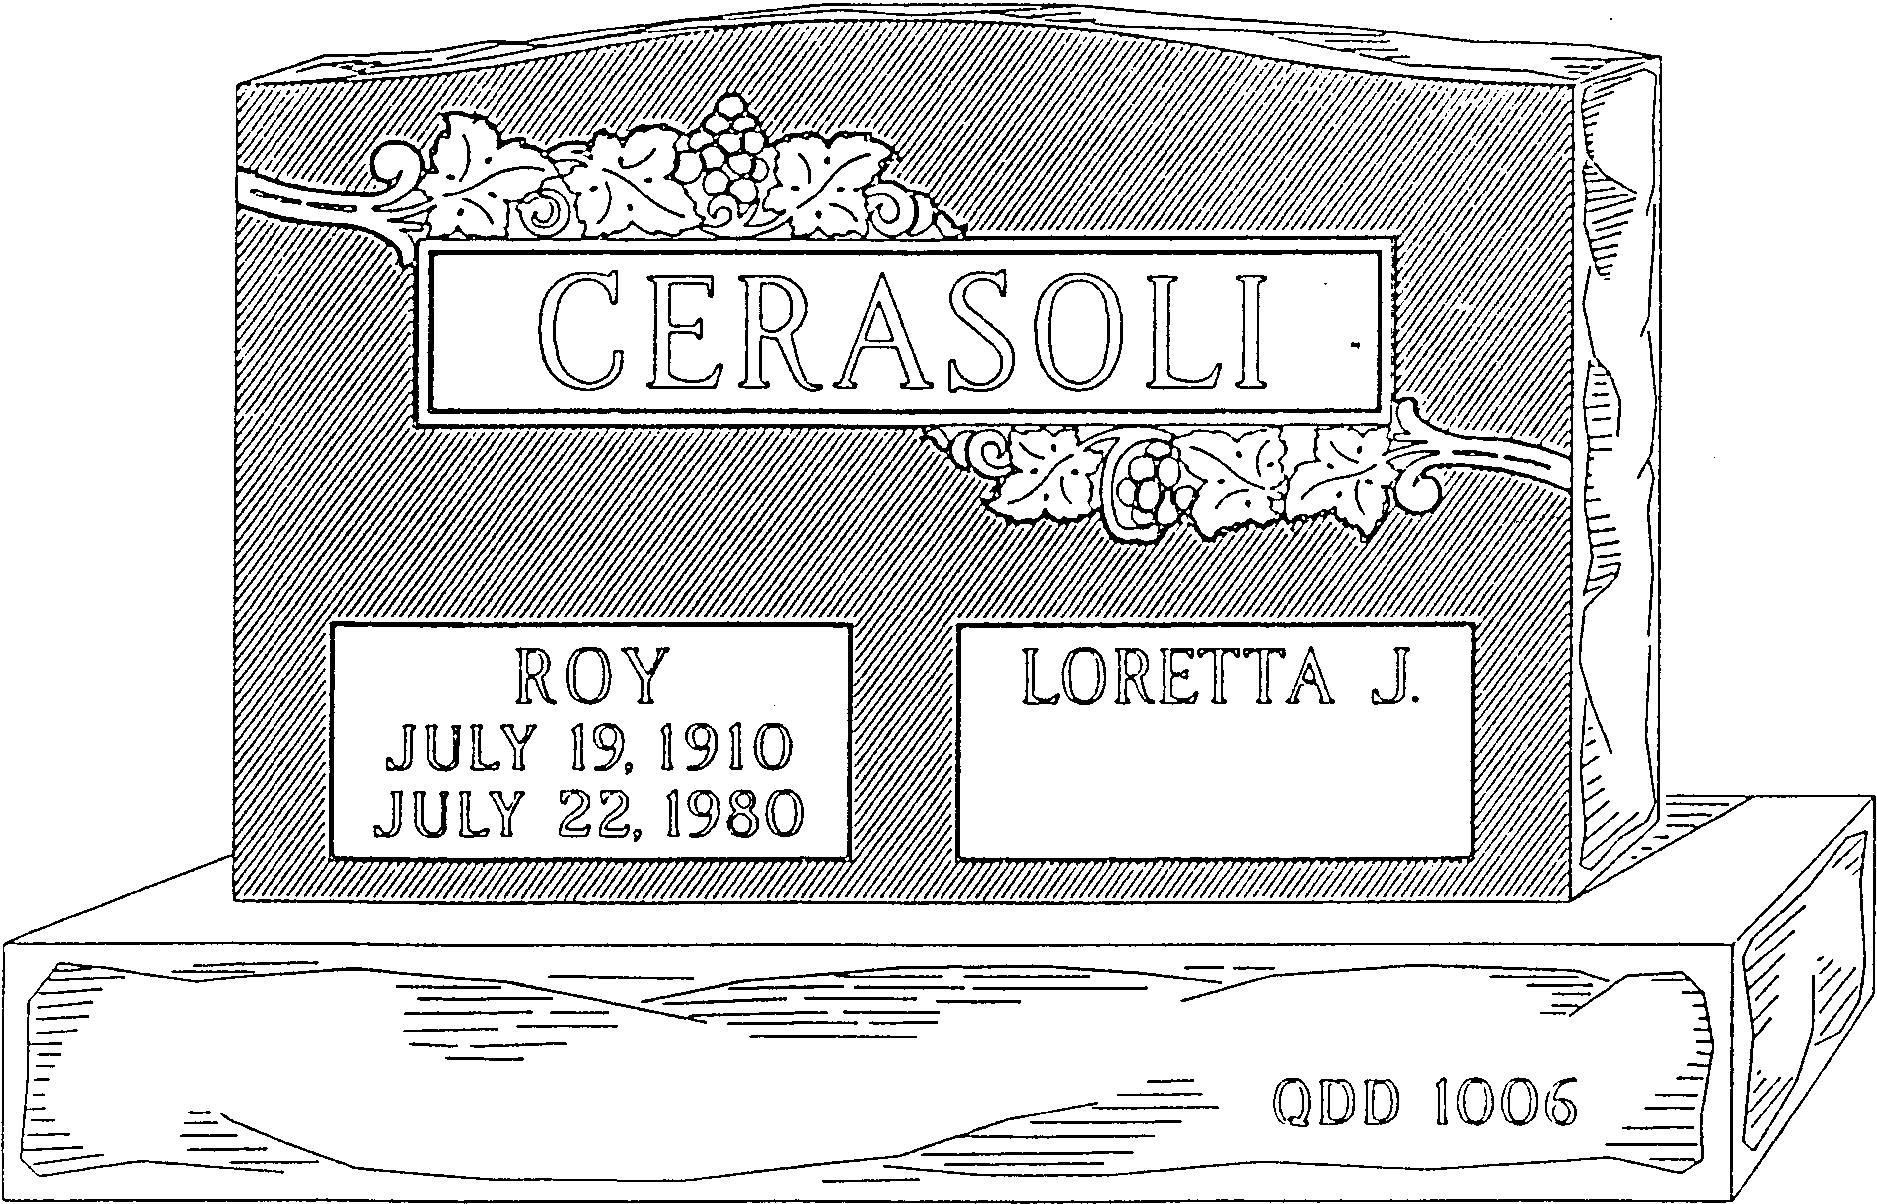 a black and white drawing of a gravestone for roy and loretta j.